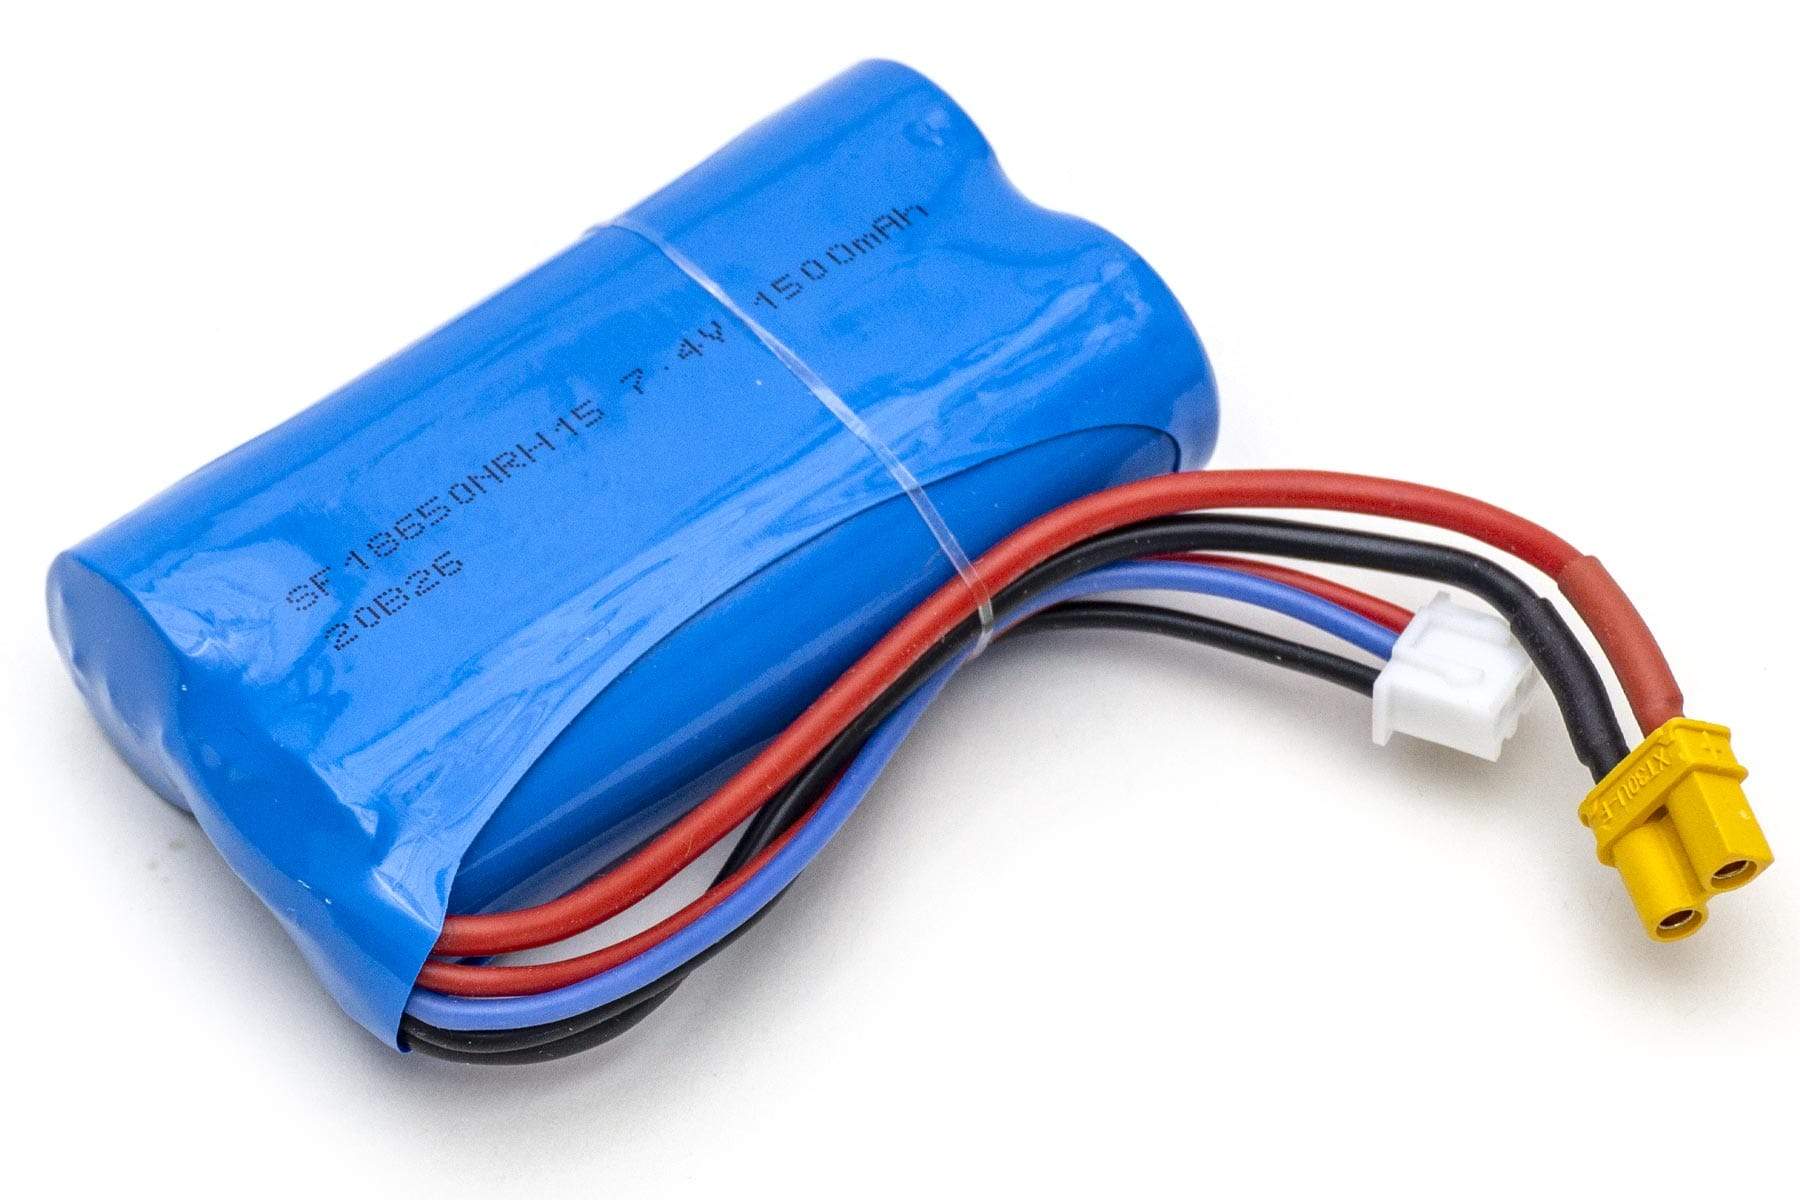 XK 1/16 Scale 16800 Excavator 2S 7.4V 1500mAh LiPo Battery with XT-30 Connector WLT-WLM6024-001